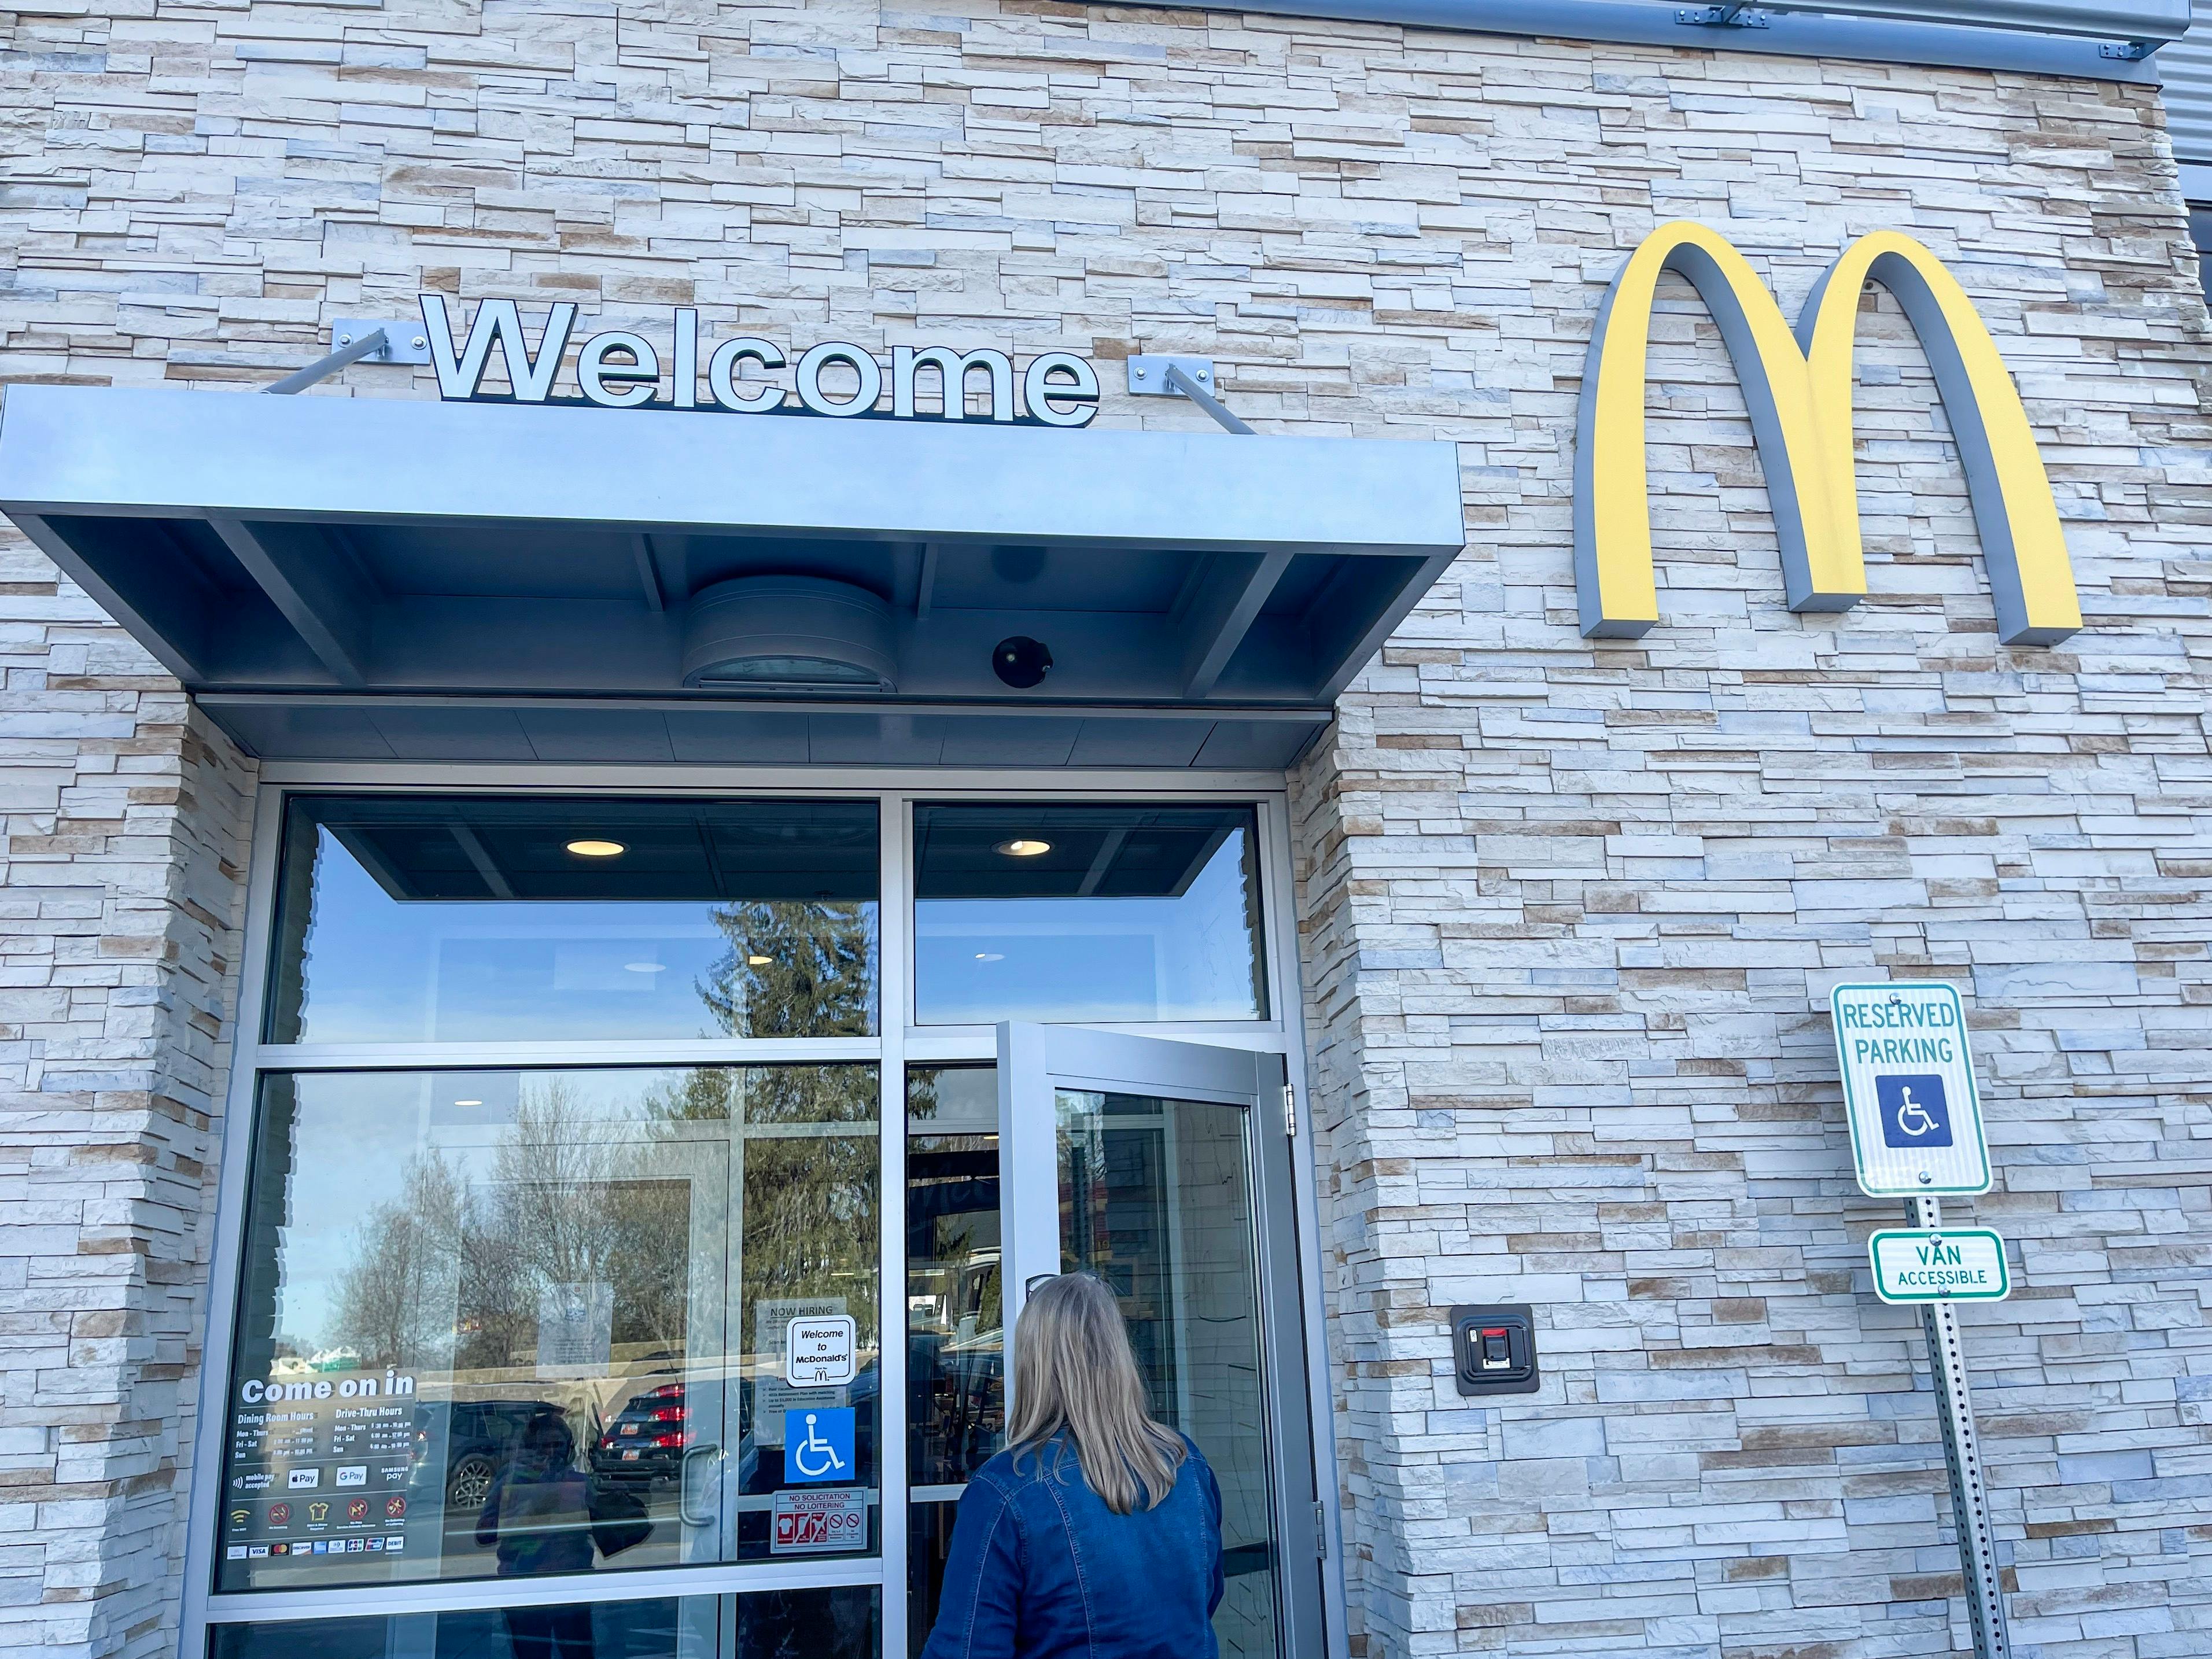 A person walking in the entrance to McDonald's with a "Welcome" sign above the door and the golden arches logo on the building's exterior.